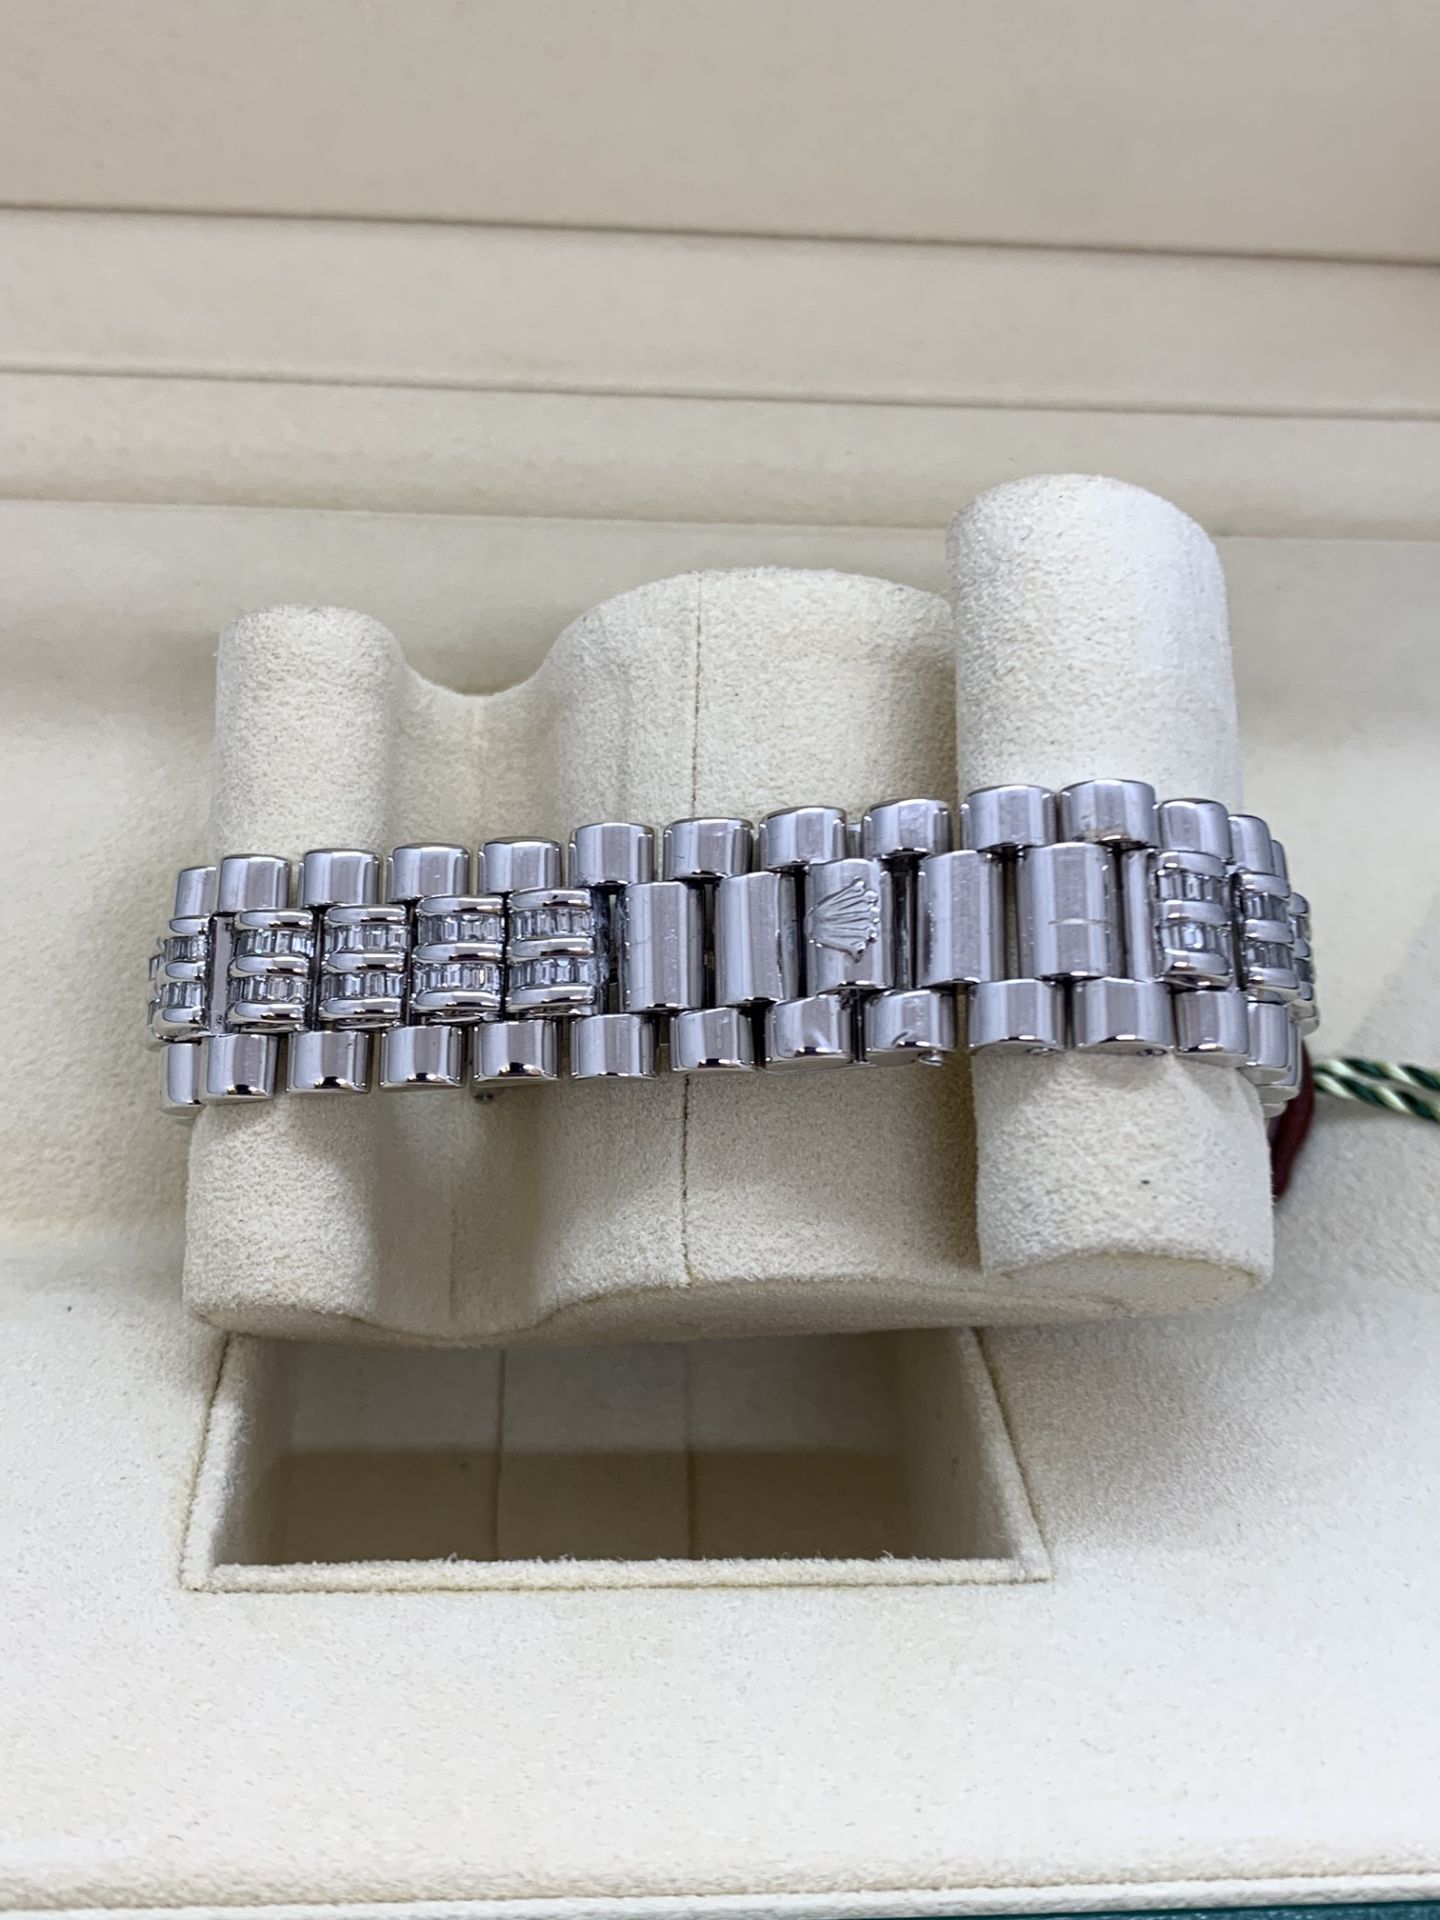 36mm DIAMOND SET DAY-DATE WATCH MARKED ROLEX SET IN WHITE METAL (TESTED AS GOLD) - Image 10 of 15